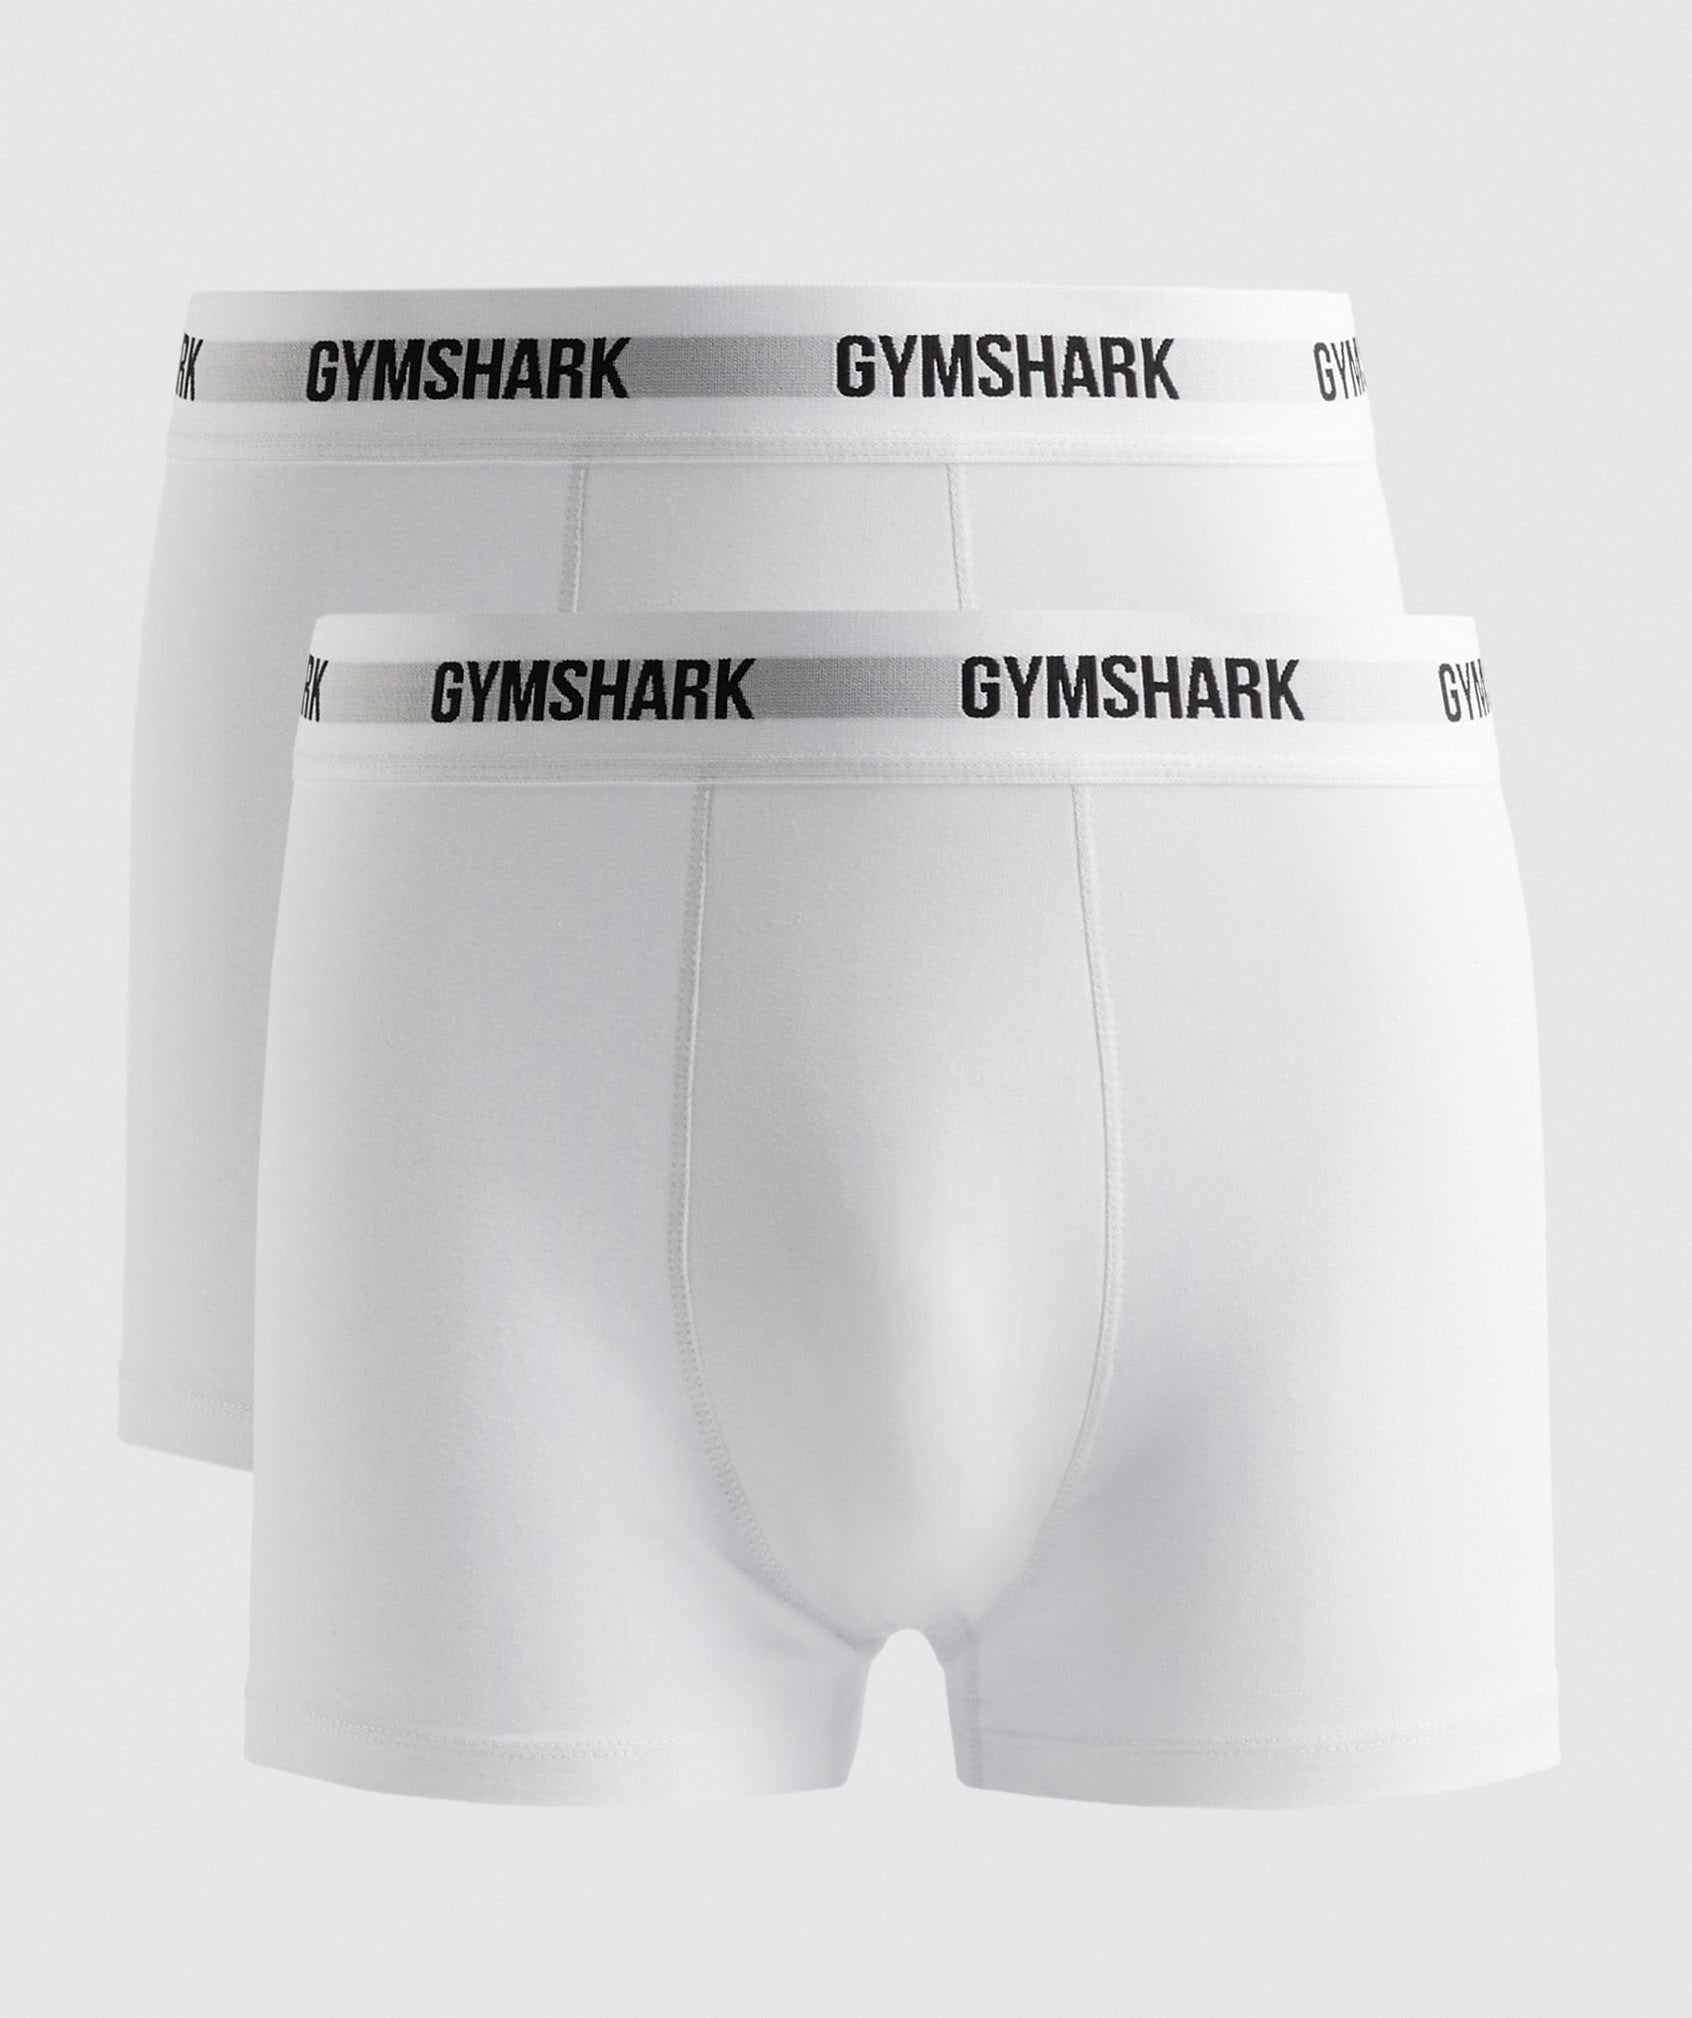 Gymshark on X: The BRAND NEW Gymshark underwear colours are NOW